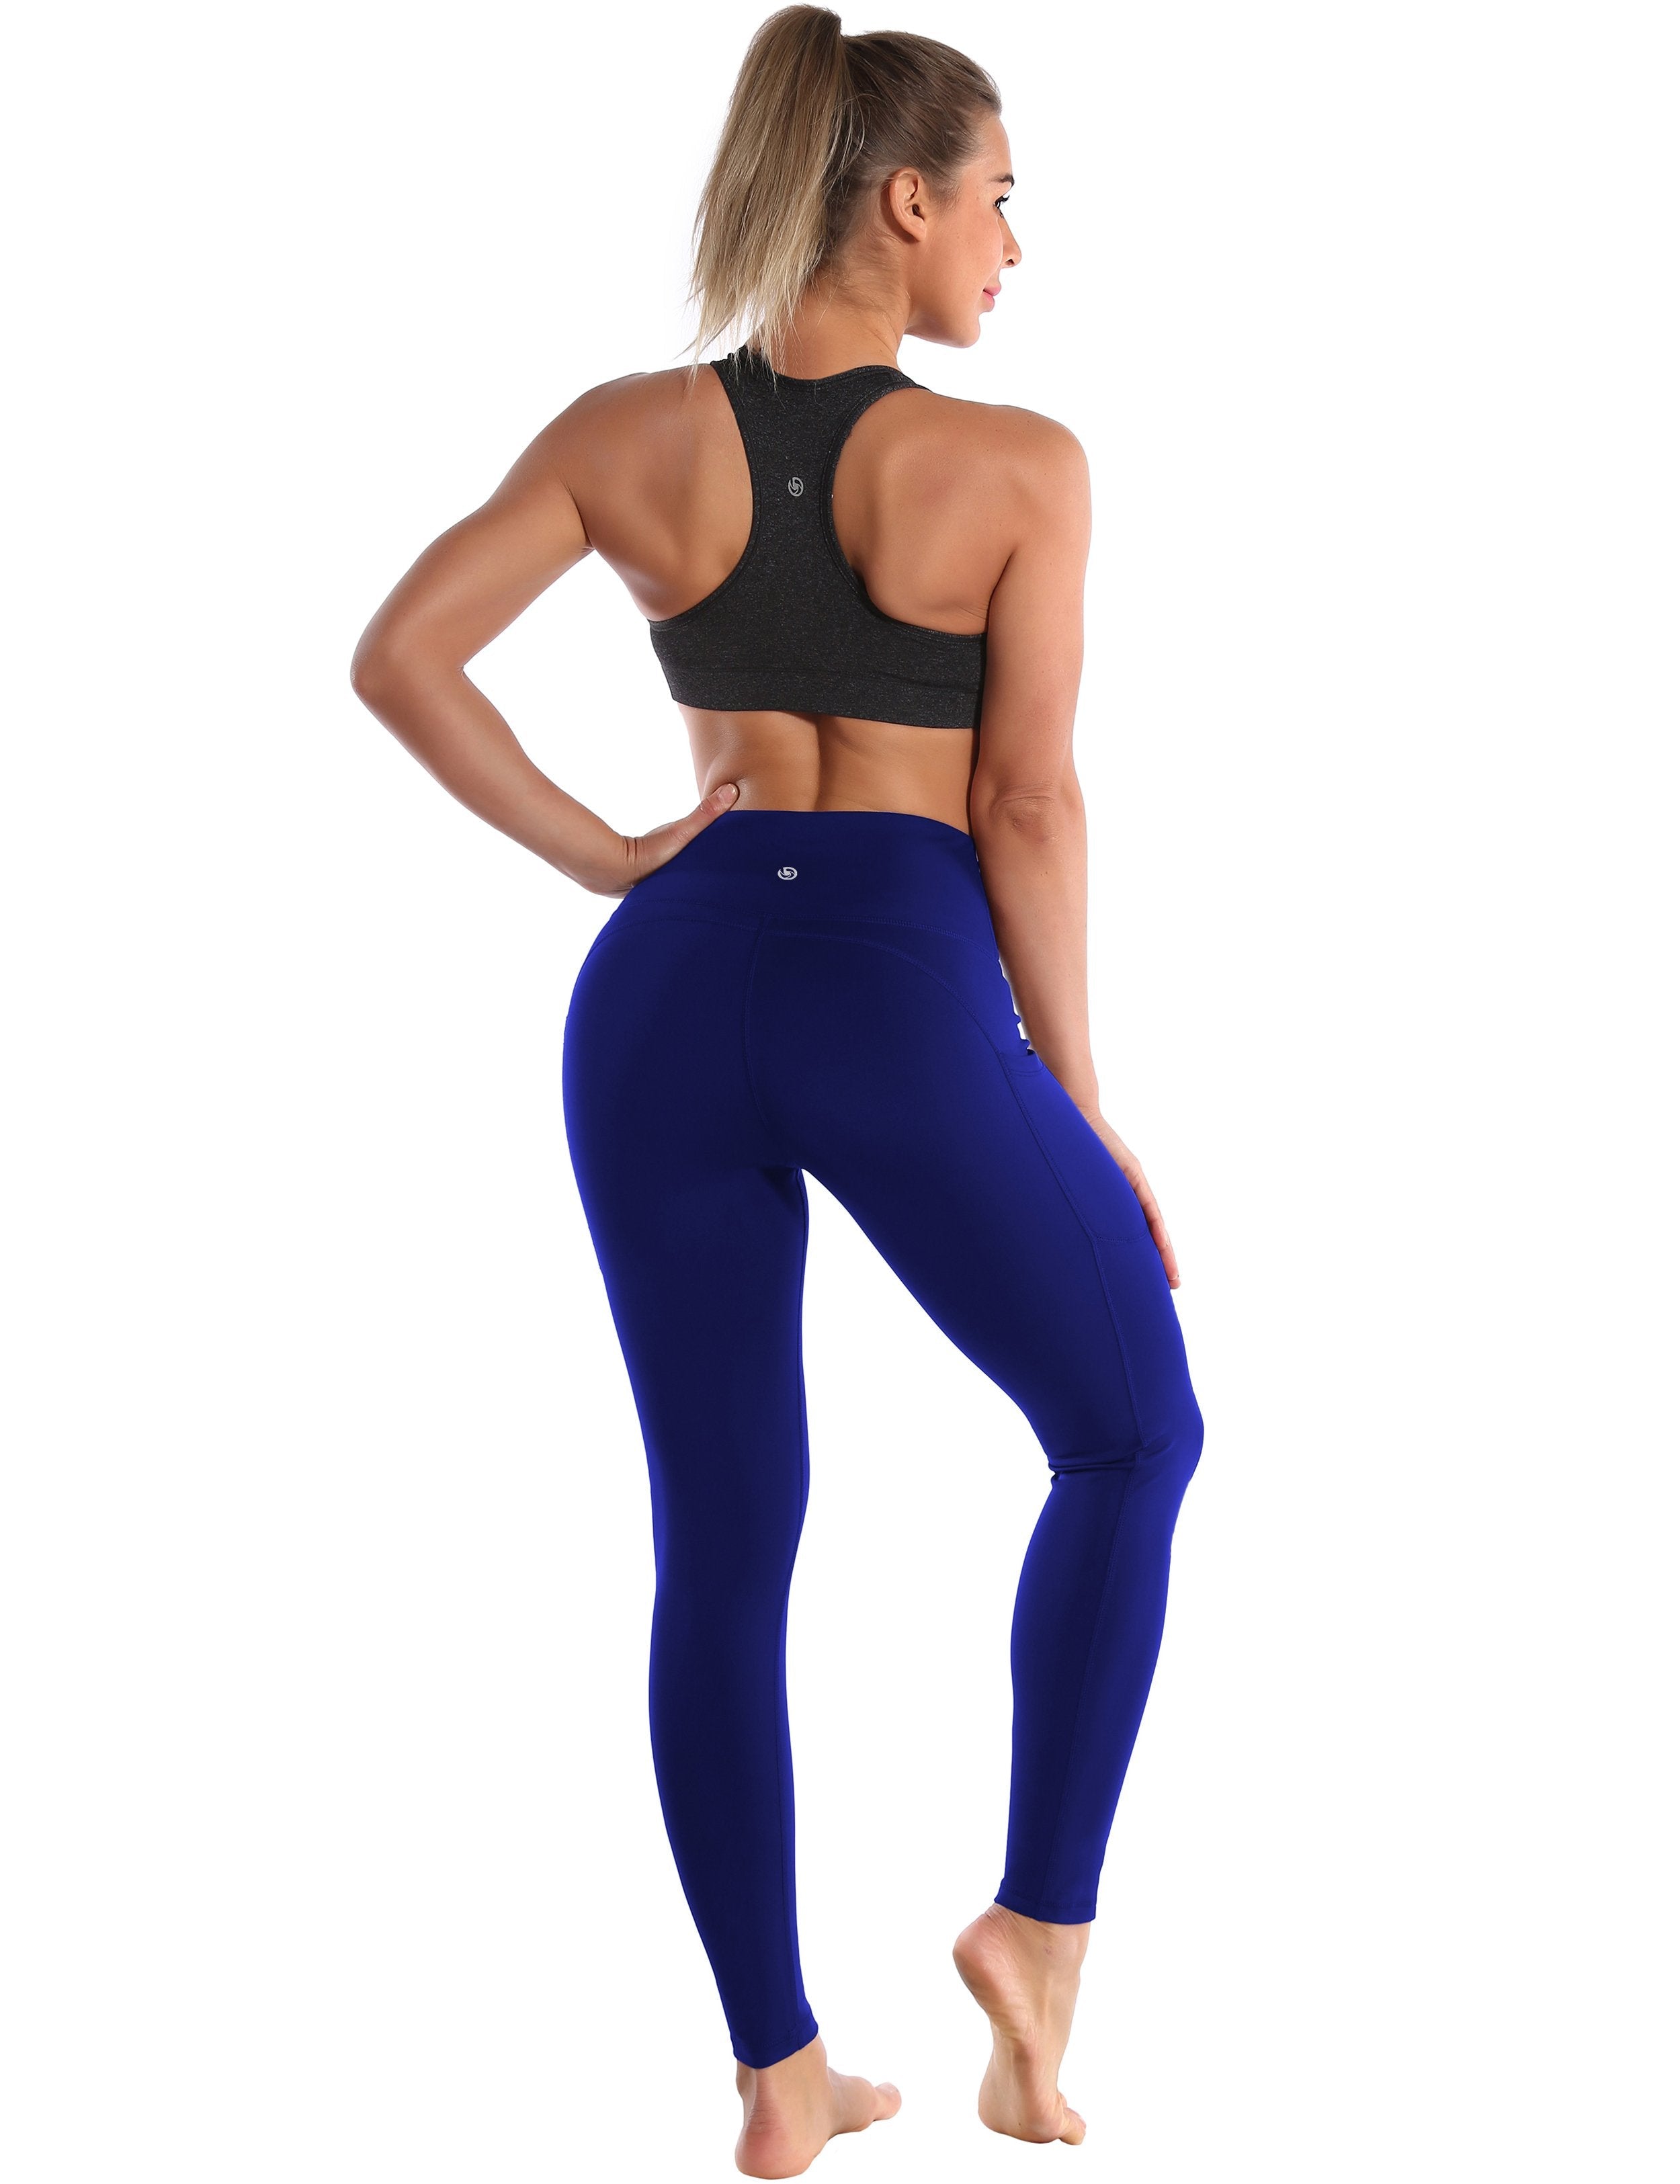 Hip Line Side Pockets Jogging Pants navy Sexy Hip Line Side Pockets 75%Nylon/25%Spandex Fabric doesn't attract lint easily 4-way stretch No see-through Moisture-wicking Tummy control Inner pocket Two lengths